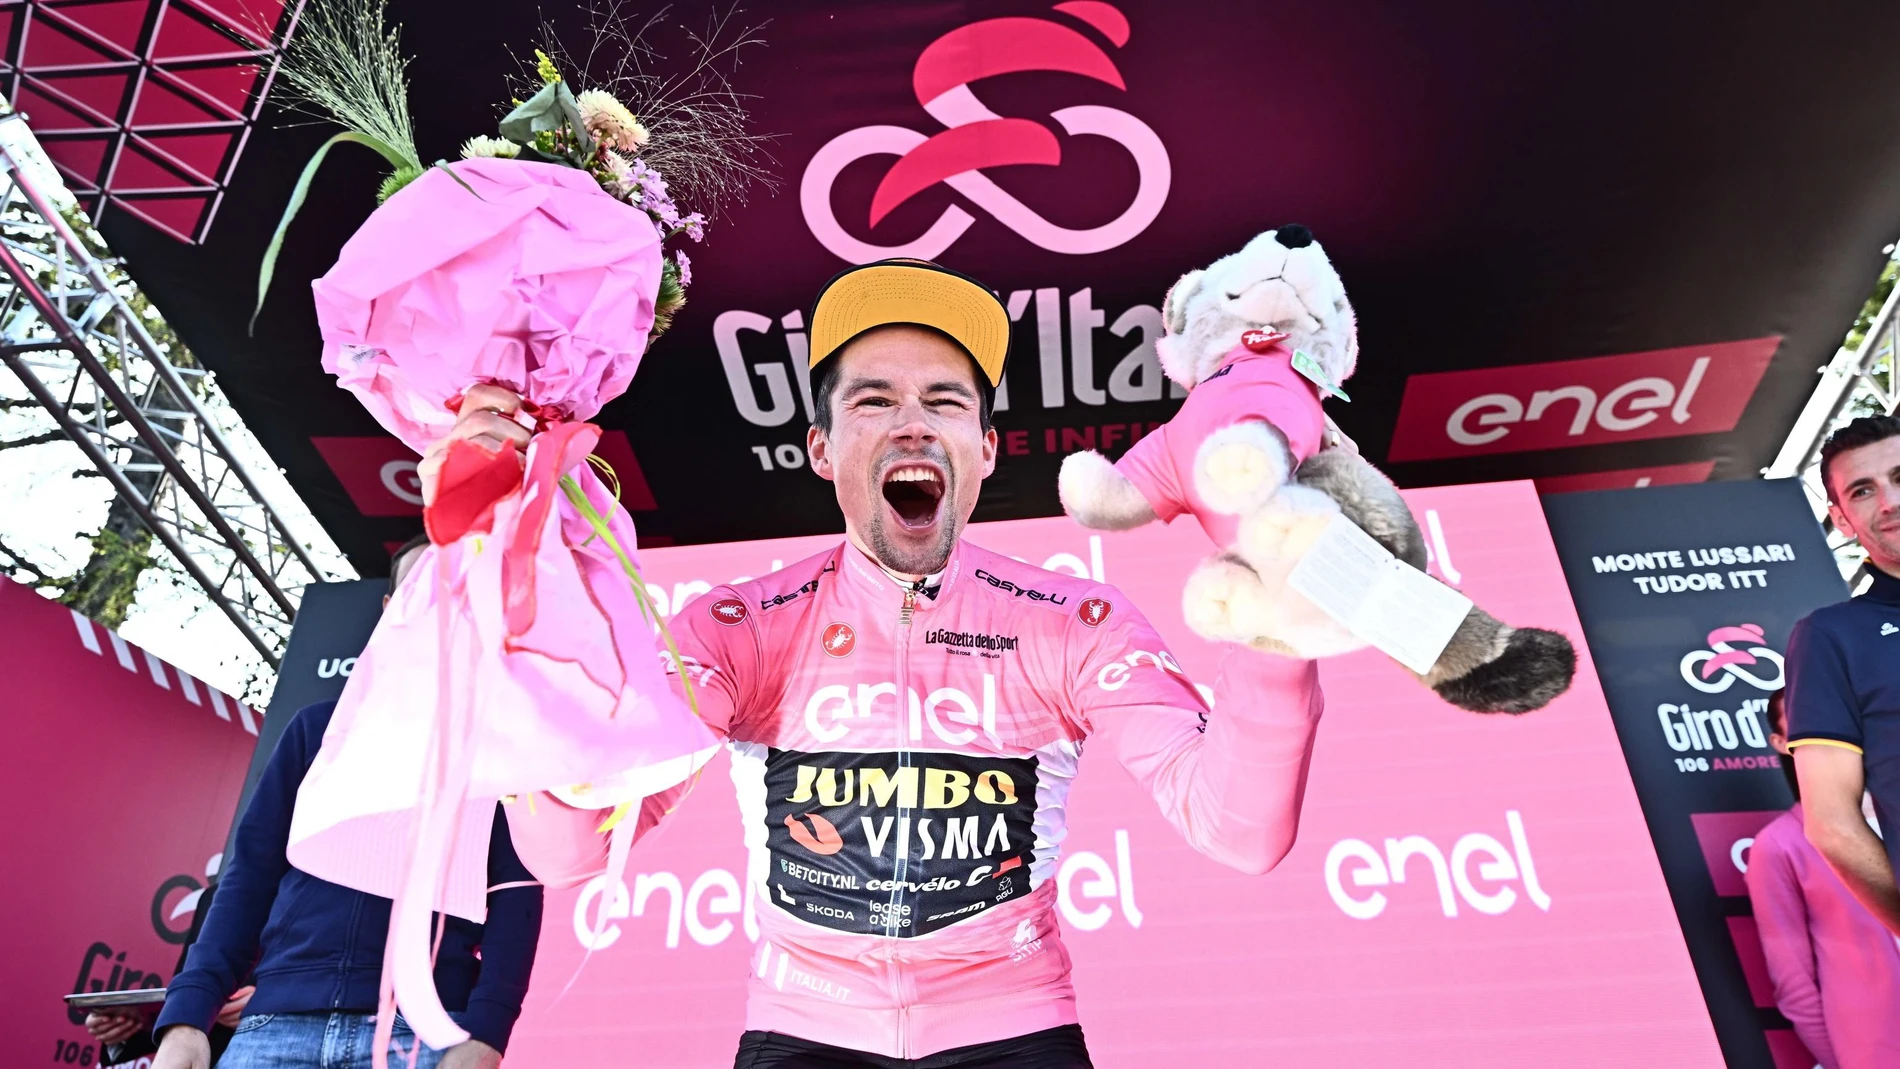 Monti Lussari (Italy), 27/05/2023.- Slovenian rider Primoz Roglic of team Jumbo Visma team wearing the overall leader's pink jersey celebrates on the podium after the 20th stage of the 2023 Giro d'Italia cycling race, an individual time trial (ITT) over 18,6 km from Tarvisio to Monte Lussari, Italy, 27 May 2023. (Ciclismo, Italia, Eslovenia) EFE/EPA/LUCA ZENNARO 